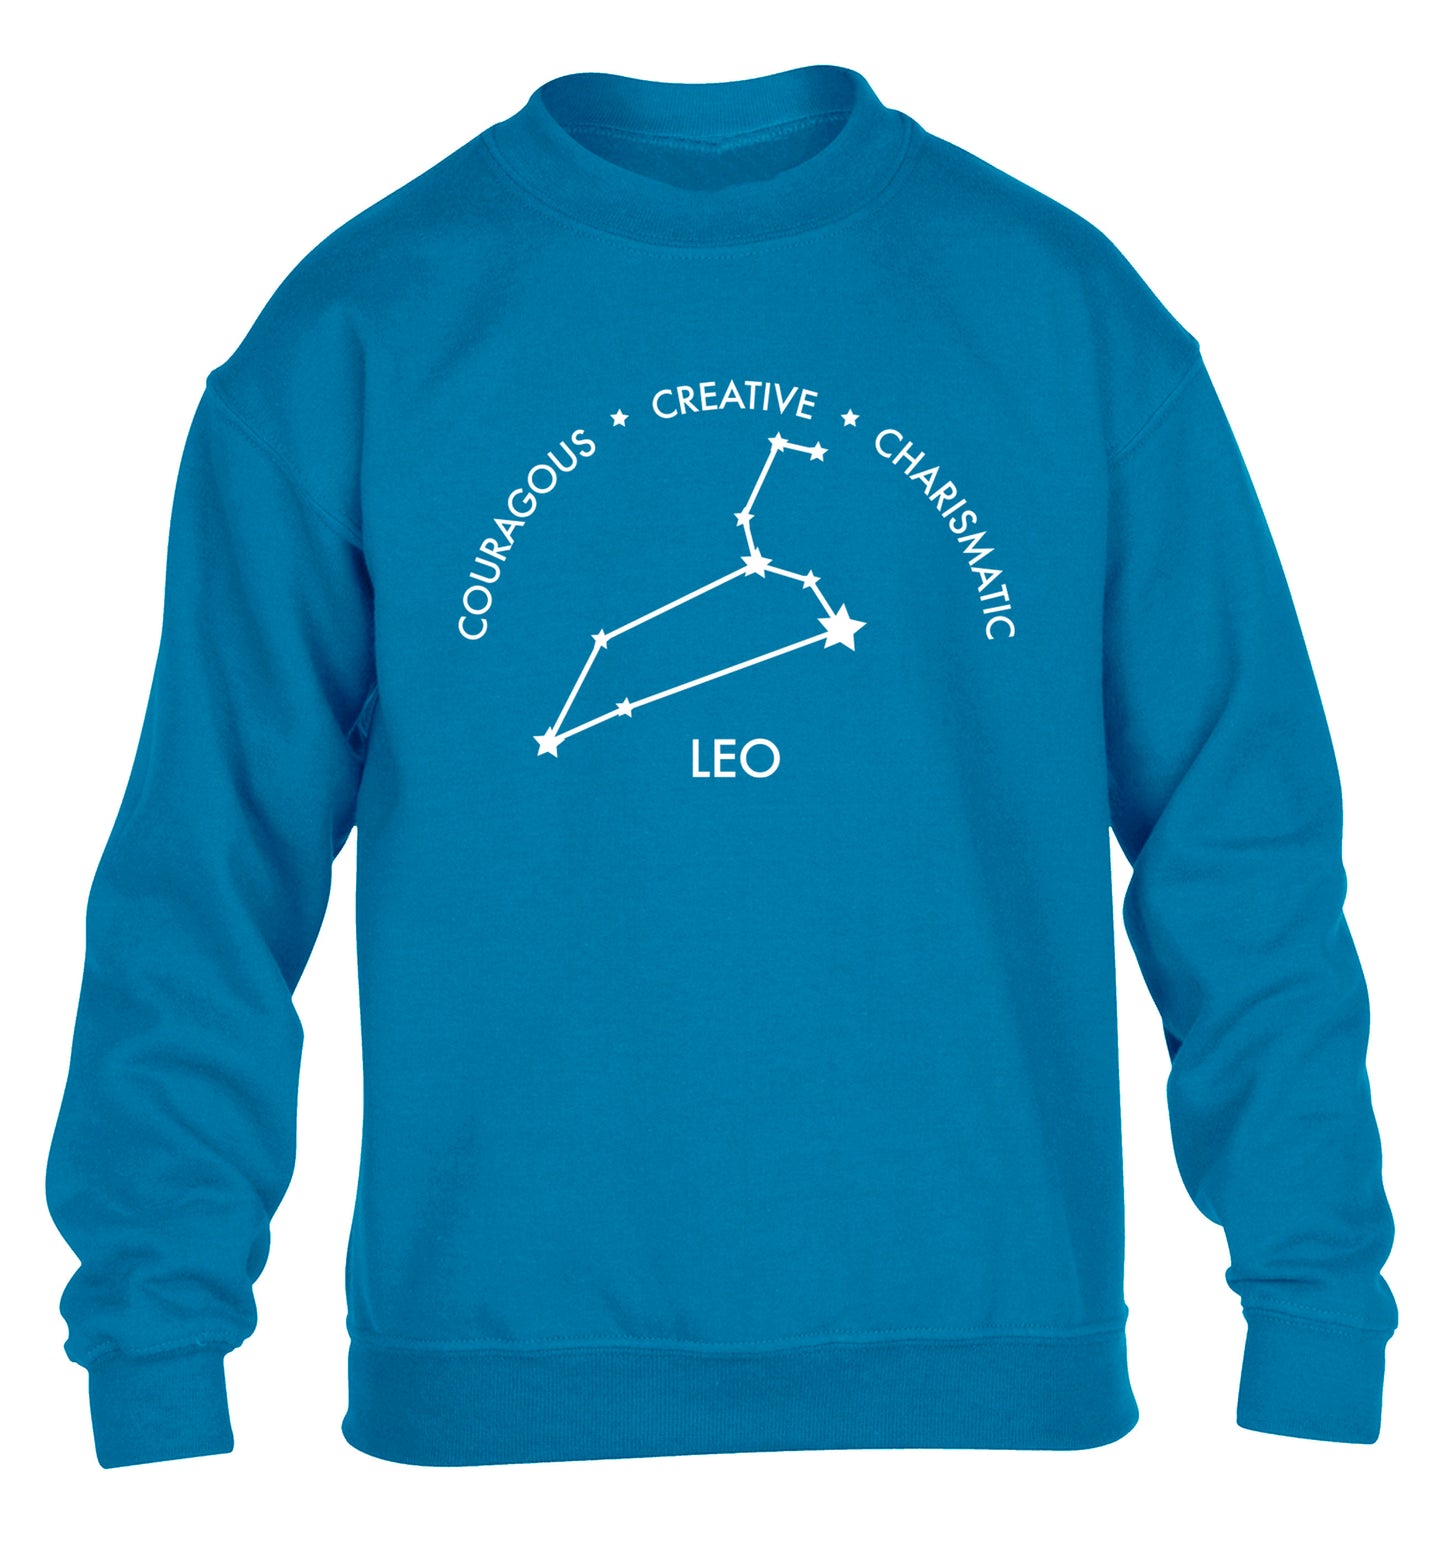 Leo - Courageous | Creative | Charismatic children's blue sweater 12-13 Years